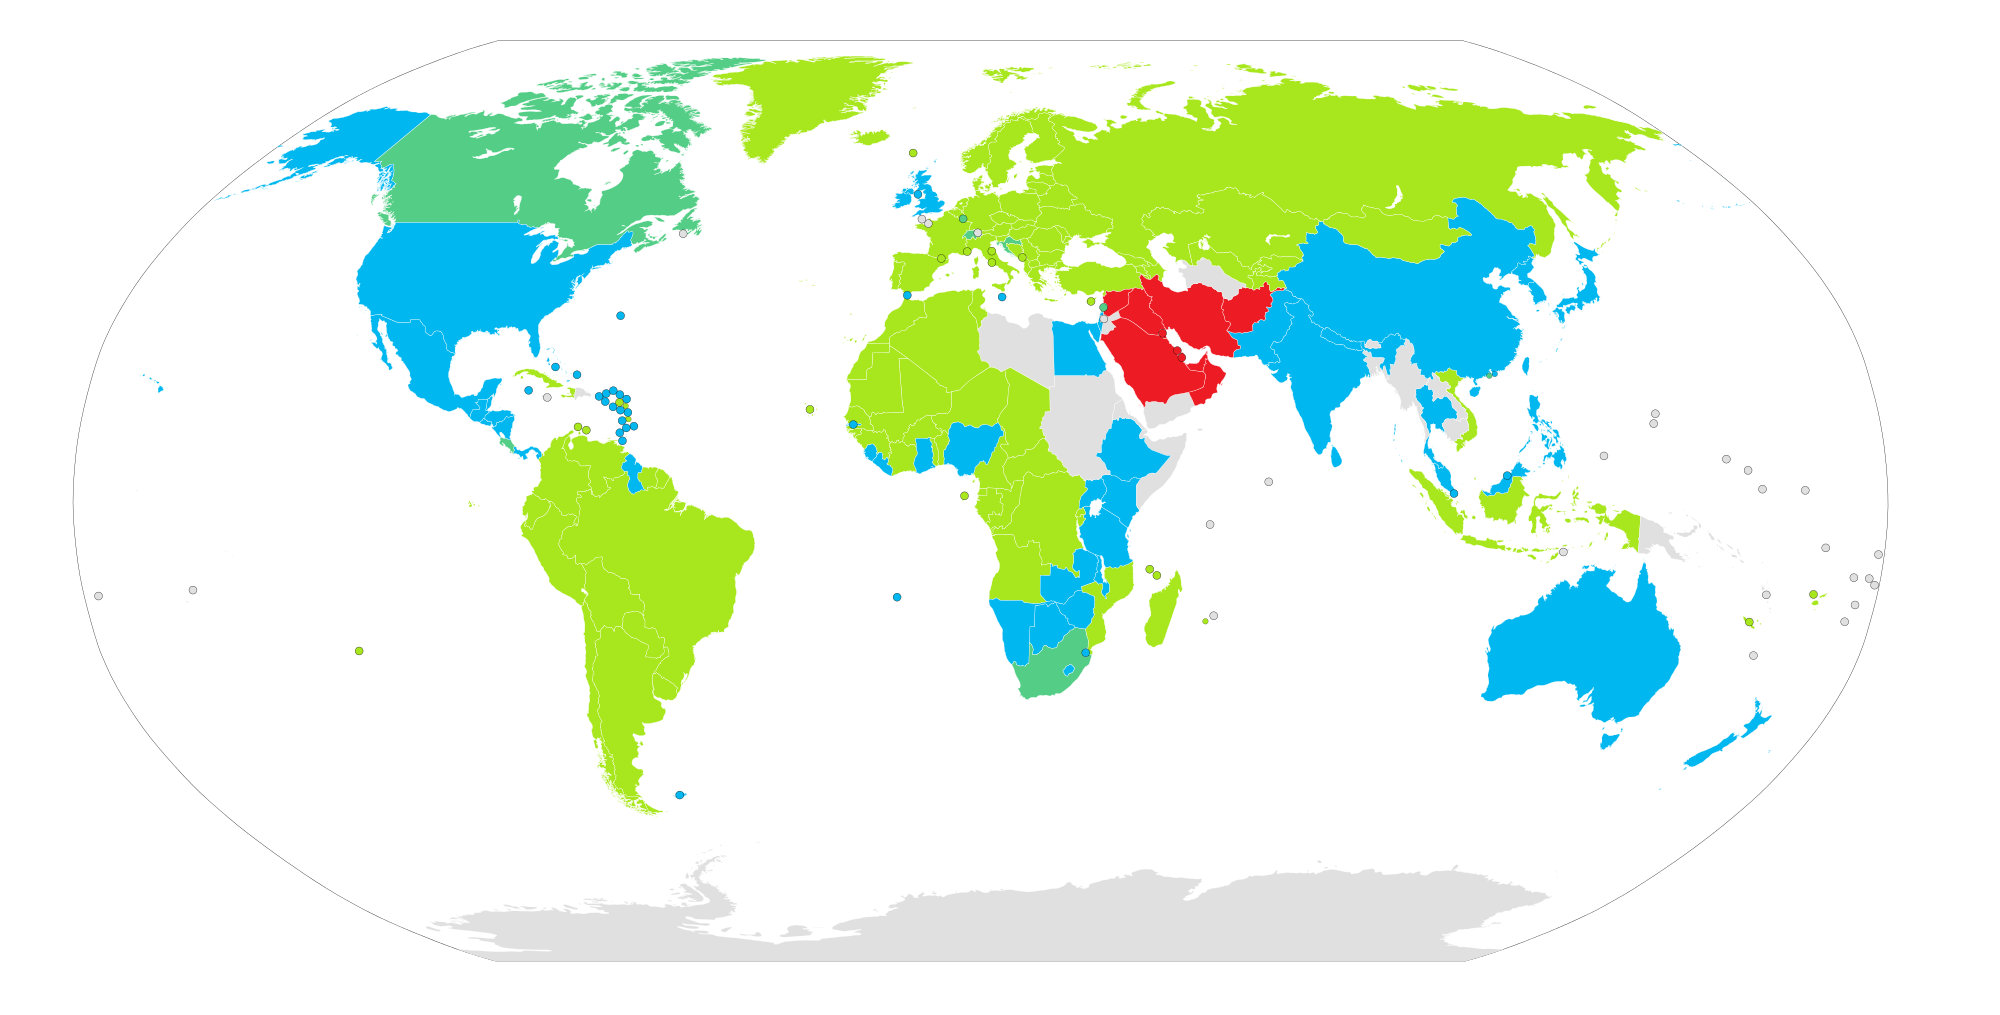 Map of countries coloured by radix point